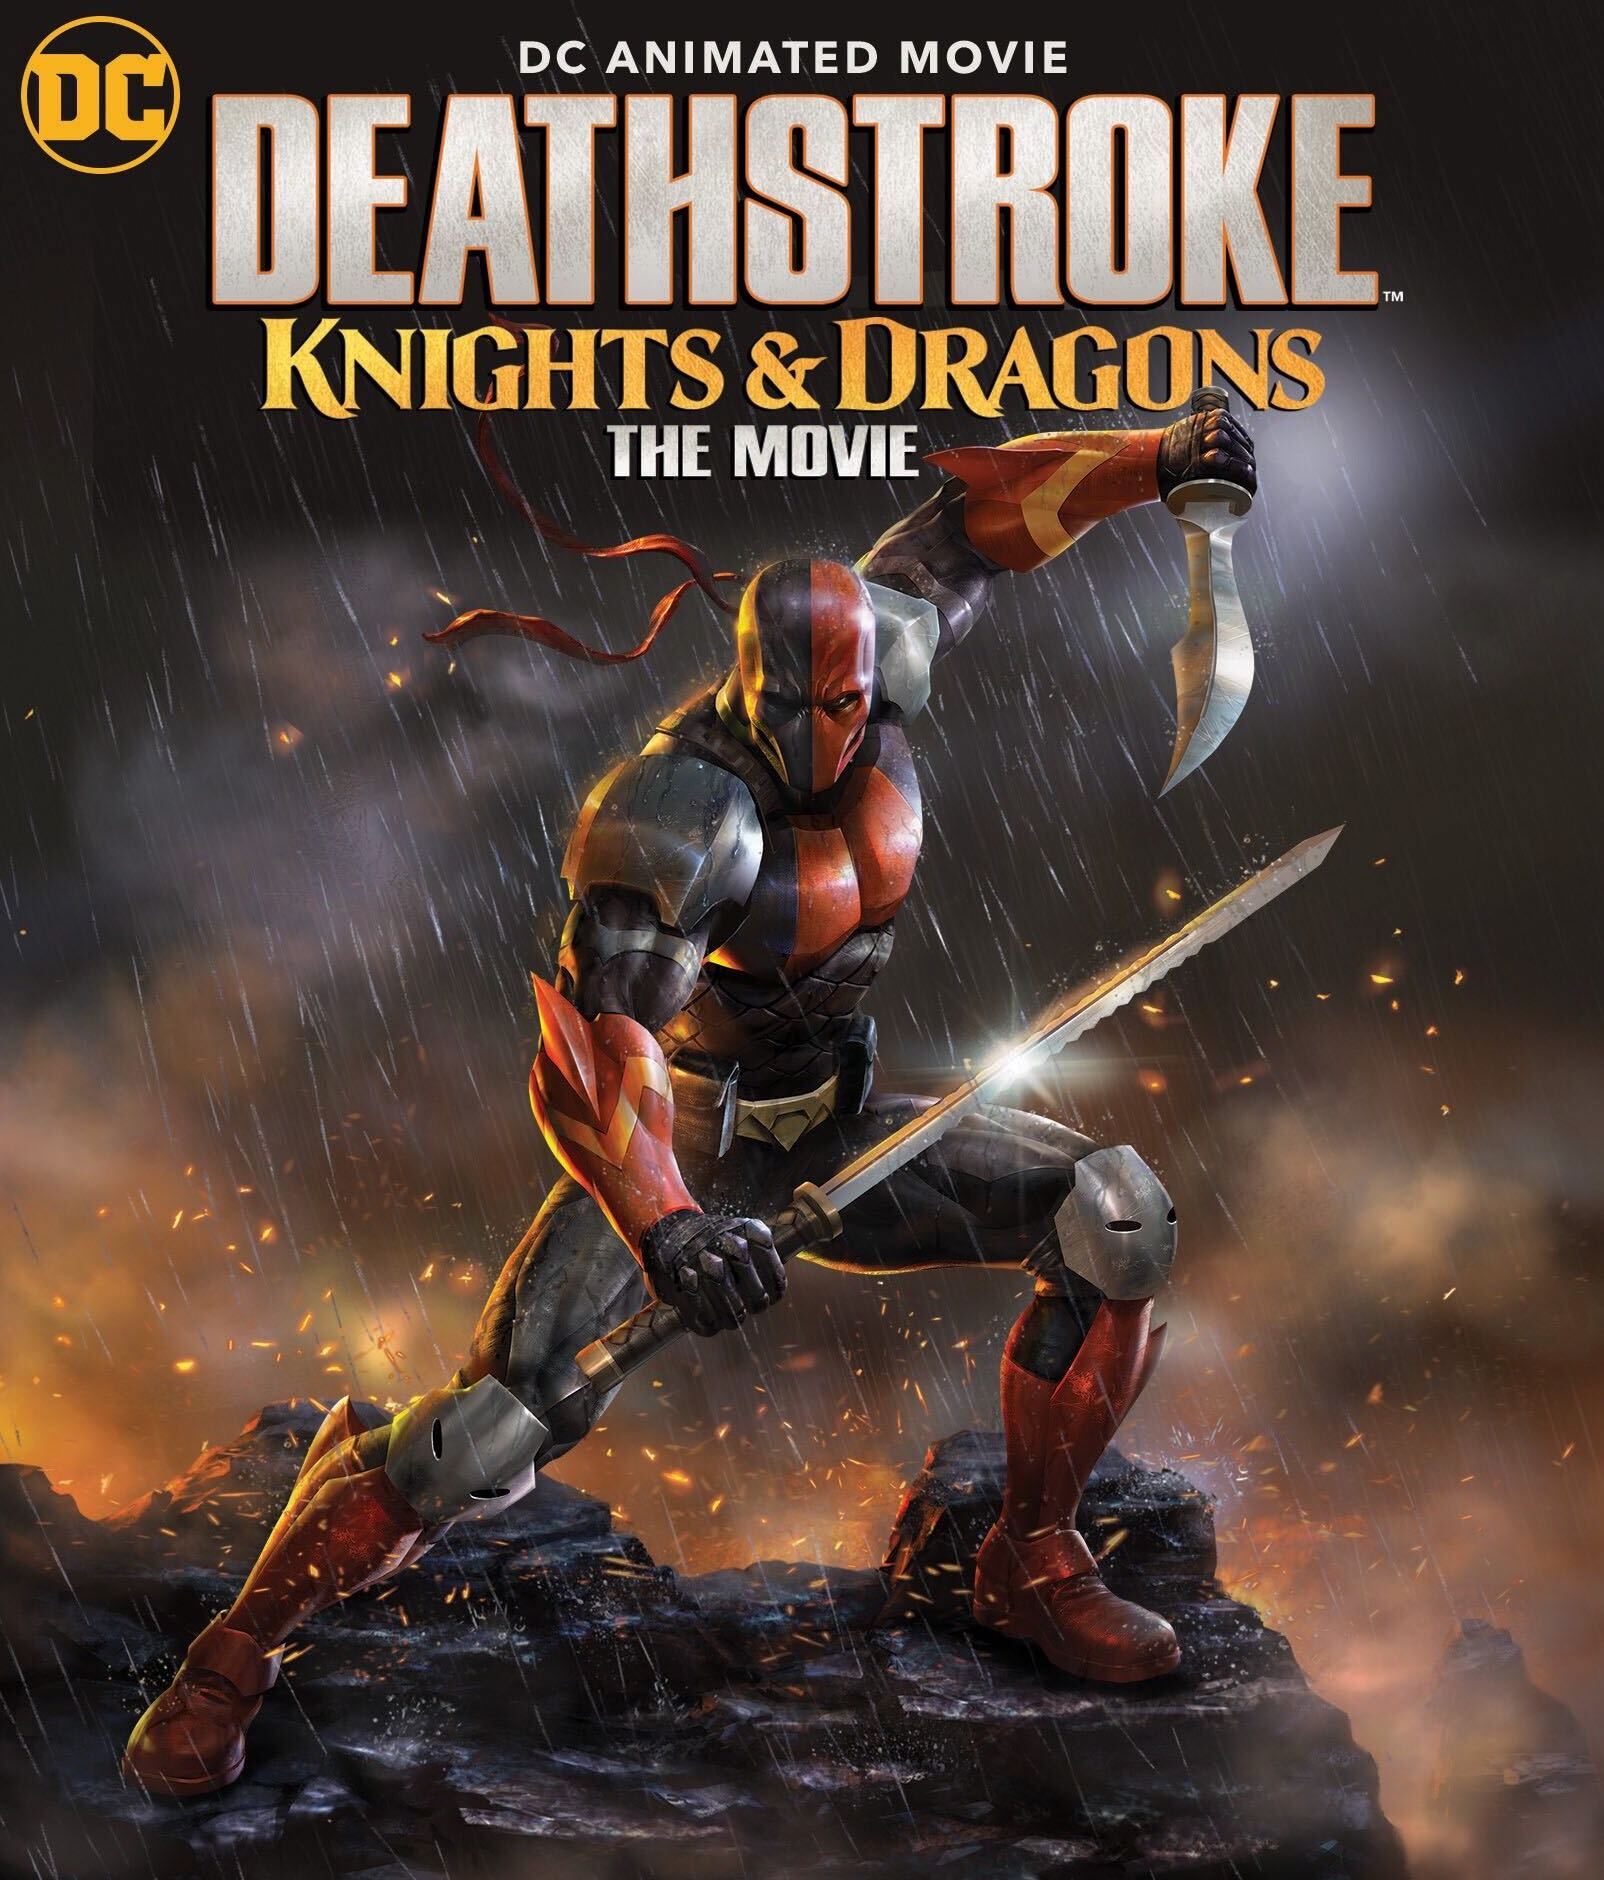 DC To Release New Animated Feature Film “Deathstroke: Knights and Dragons”  – The Cultured Nerd